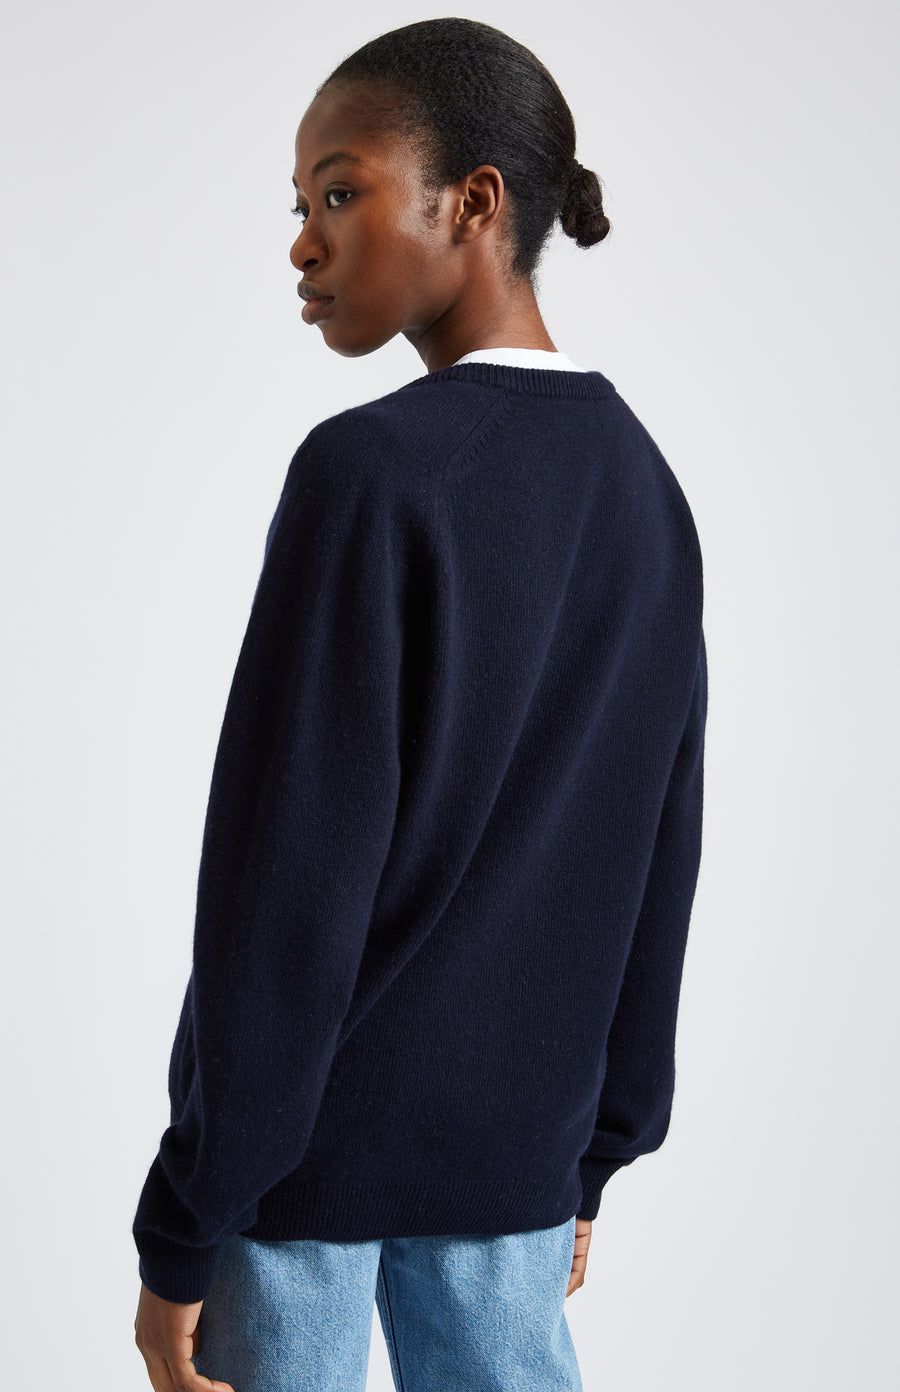 Pringle of Scotland Archive Women's V neck Lambswool Jumper In Navy rear view